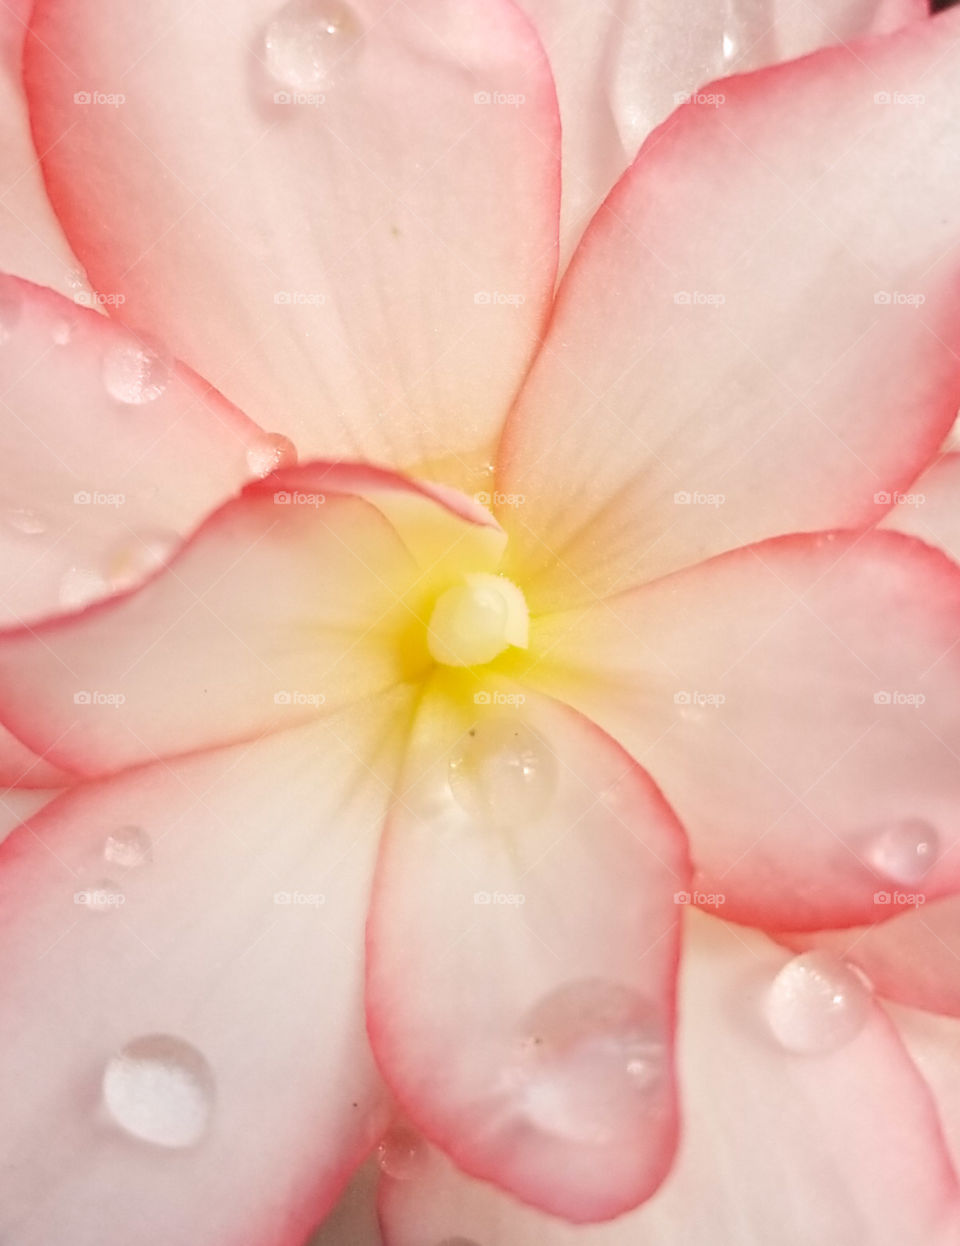 Raindrops on a Flower